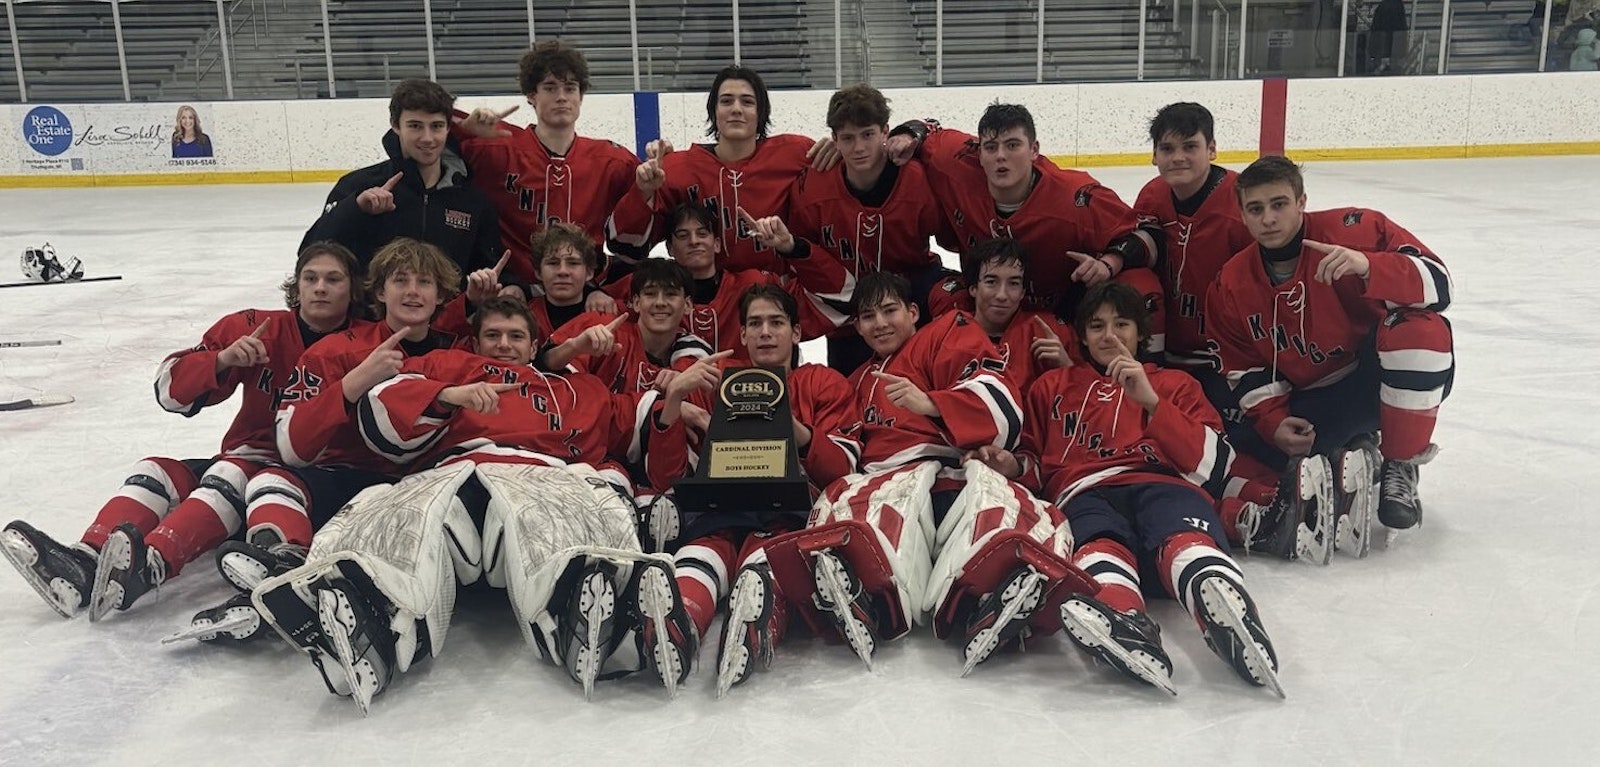 Grosse Pointe Woods University Liggett celebrates a 1-0 victory over Ann Arbor Fr. Gabriel Richard for the CHSL Cardinal Division championship, avenging an overtime loss to the Fighting Irish in last year’s finale. (Photo via Grosse Pointe Woods University Liggett’s Facebook page)